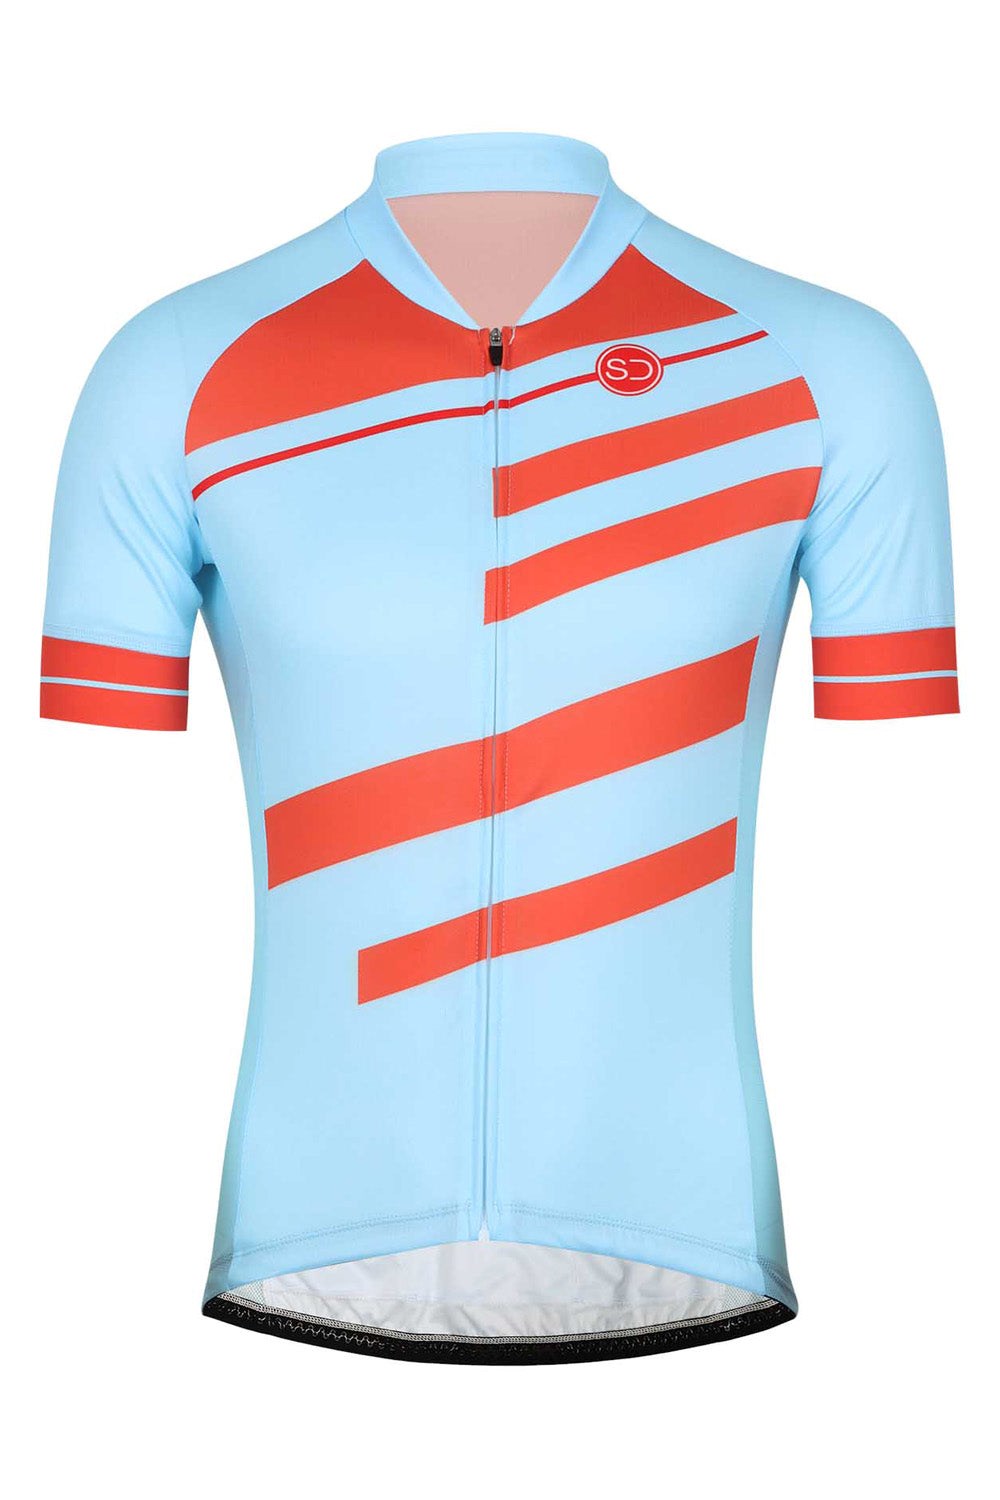 Ecrins Mens Cycle Jersey -